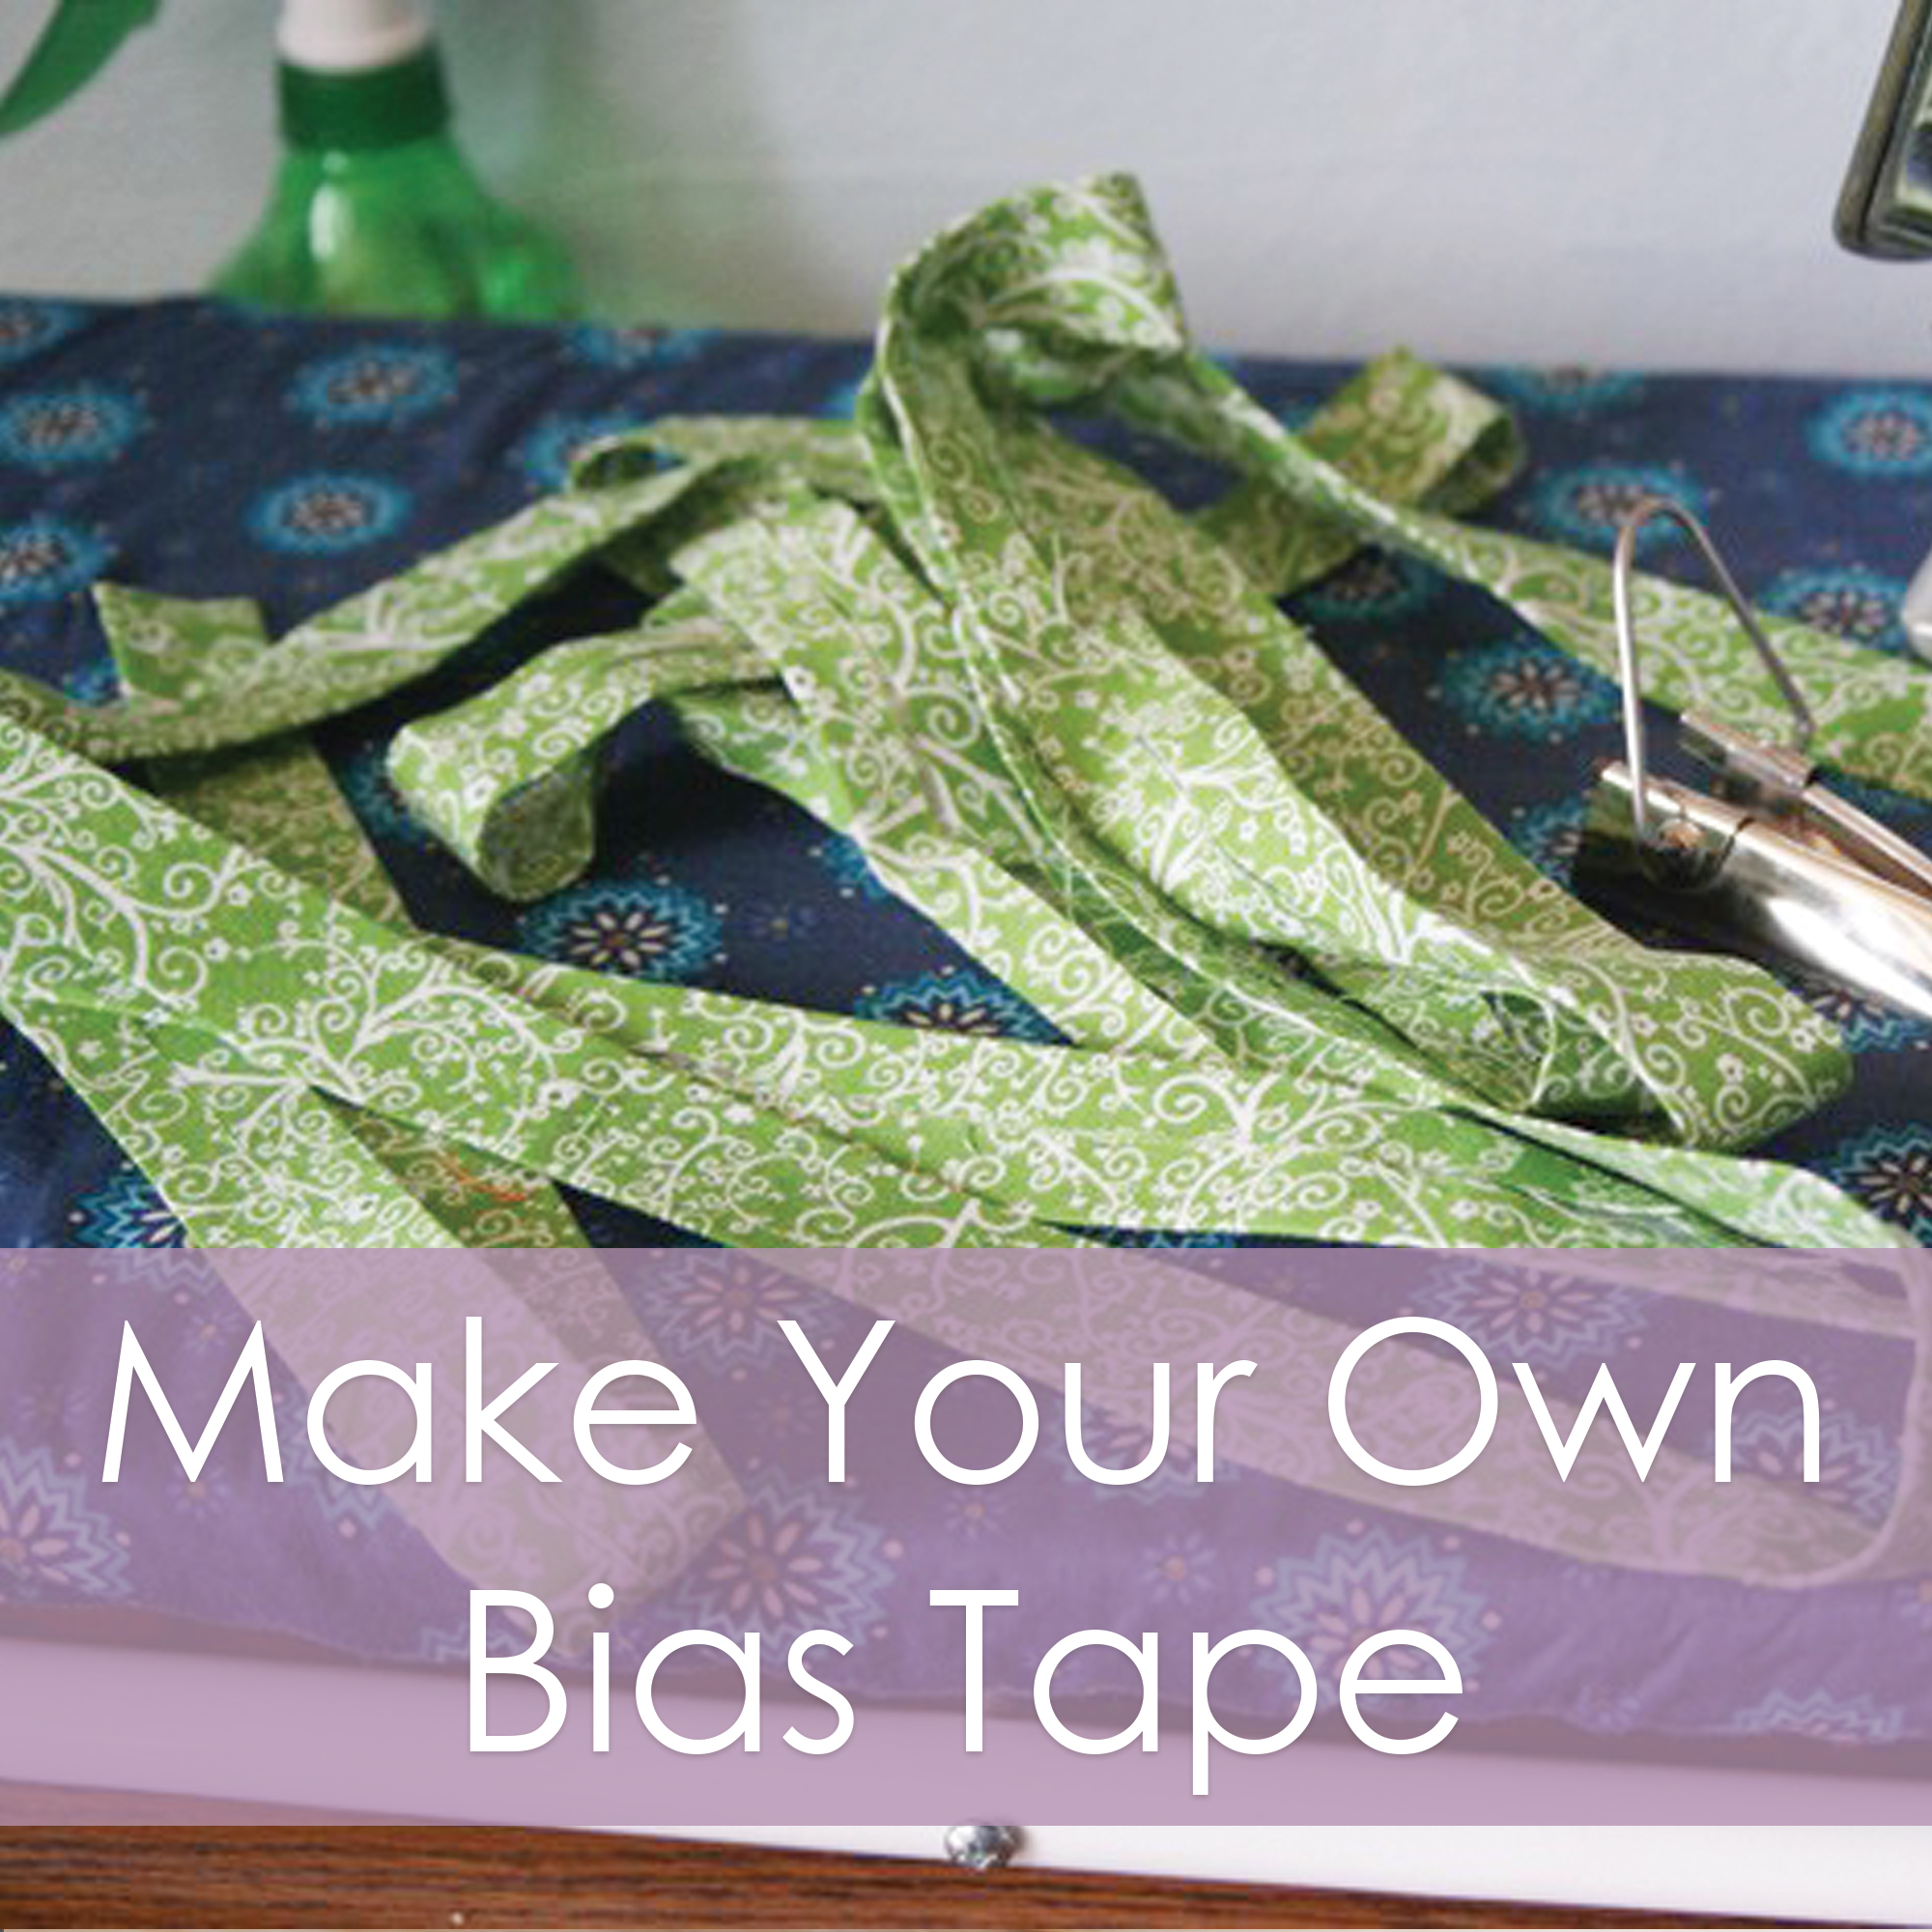 Make Your Own Bias Tape - a tutorial from Muse of the Morning